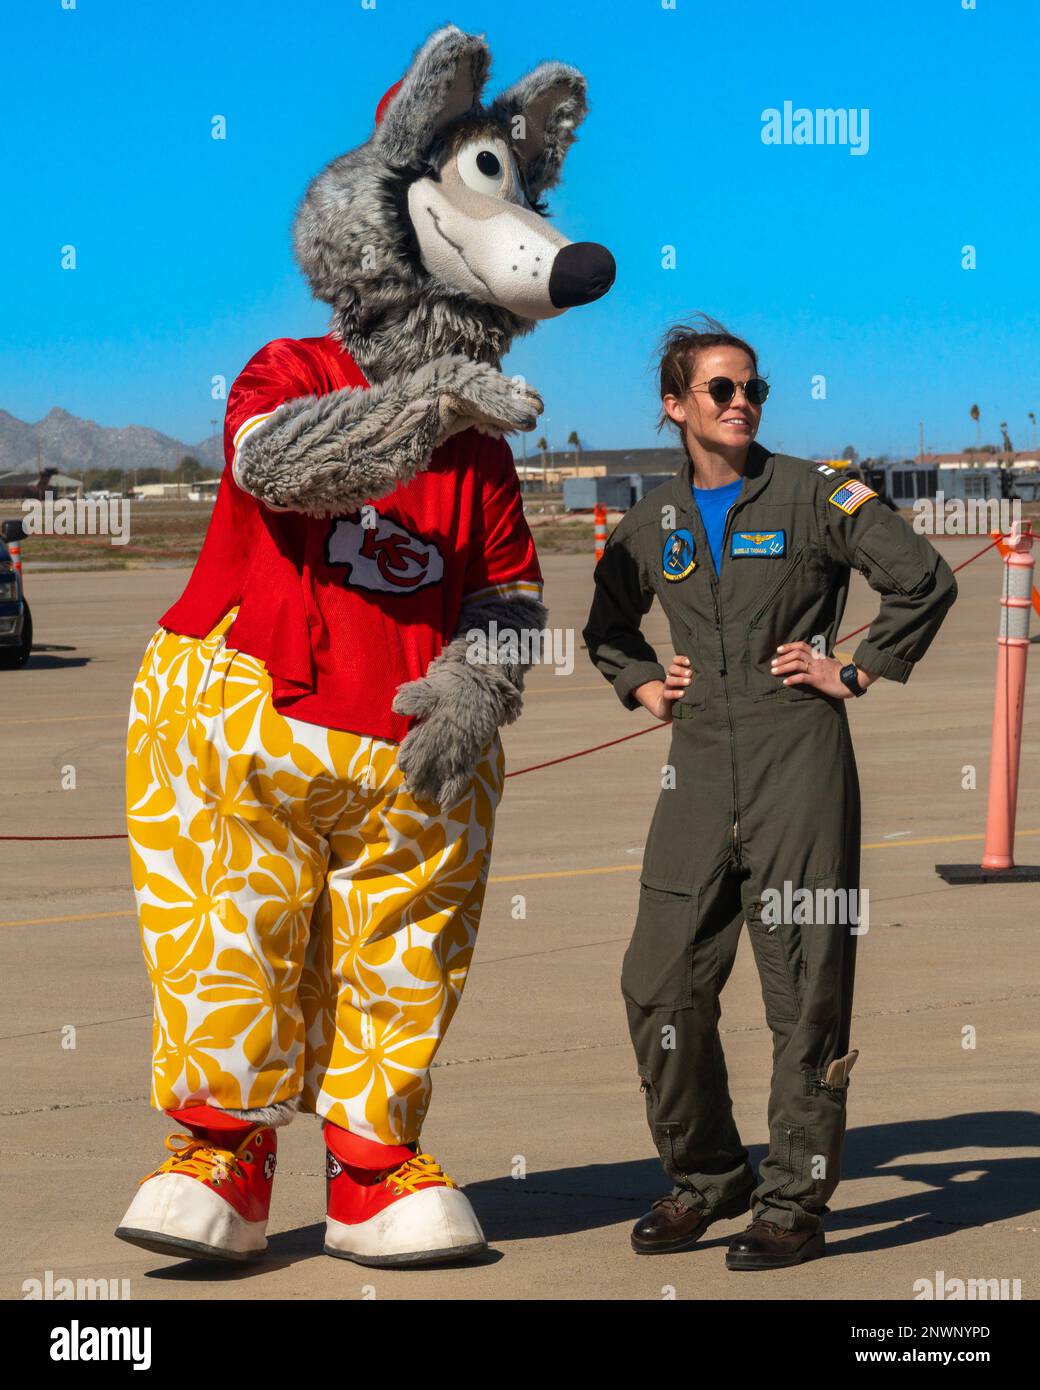 U.S. Navy Lt. Suzelle Thomas, Strike Fighter Squadron (VFA) 192 pilot, listens to KC Wolf, Kansas City Chiefs mascot, Feb. 10, 2023, at Luke Air Force Base, Arizona. Thomas and KC Wolf attended a community relations event at Luke AFB in preparation for the 2023 Super Bowl. Stock Photo